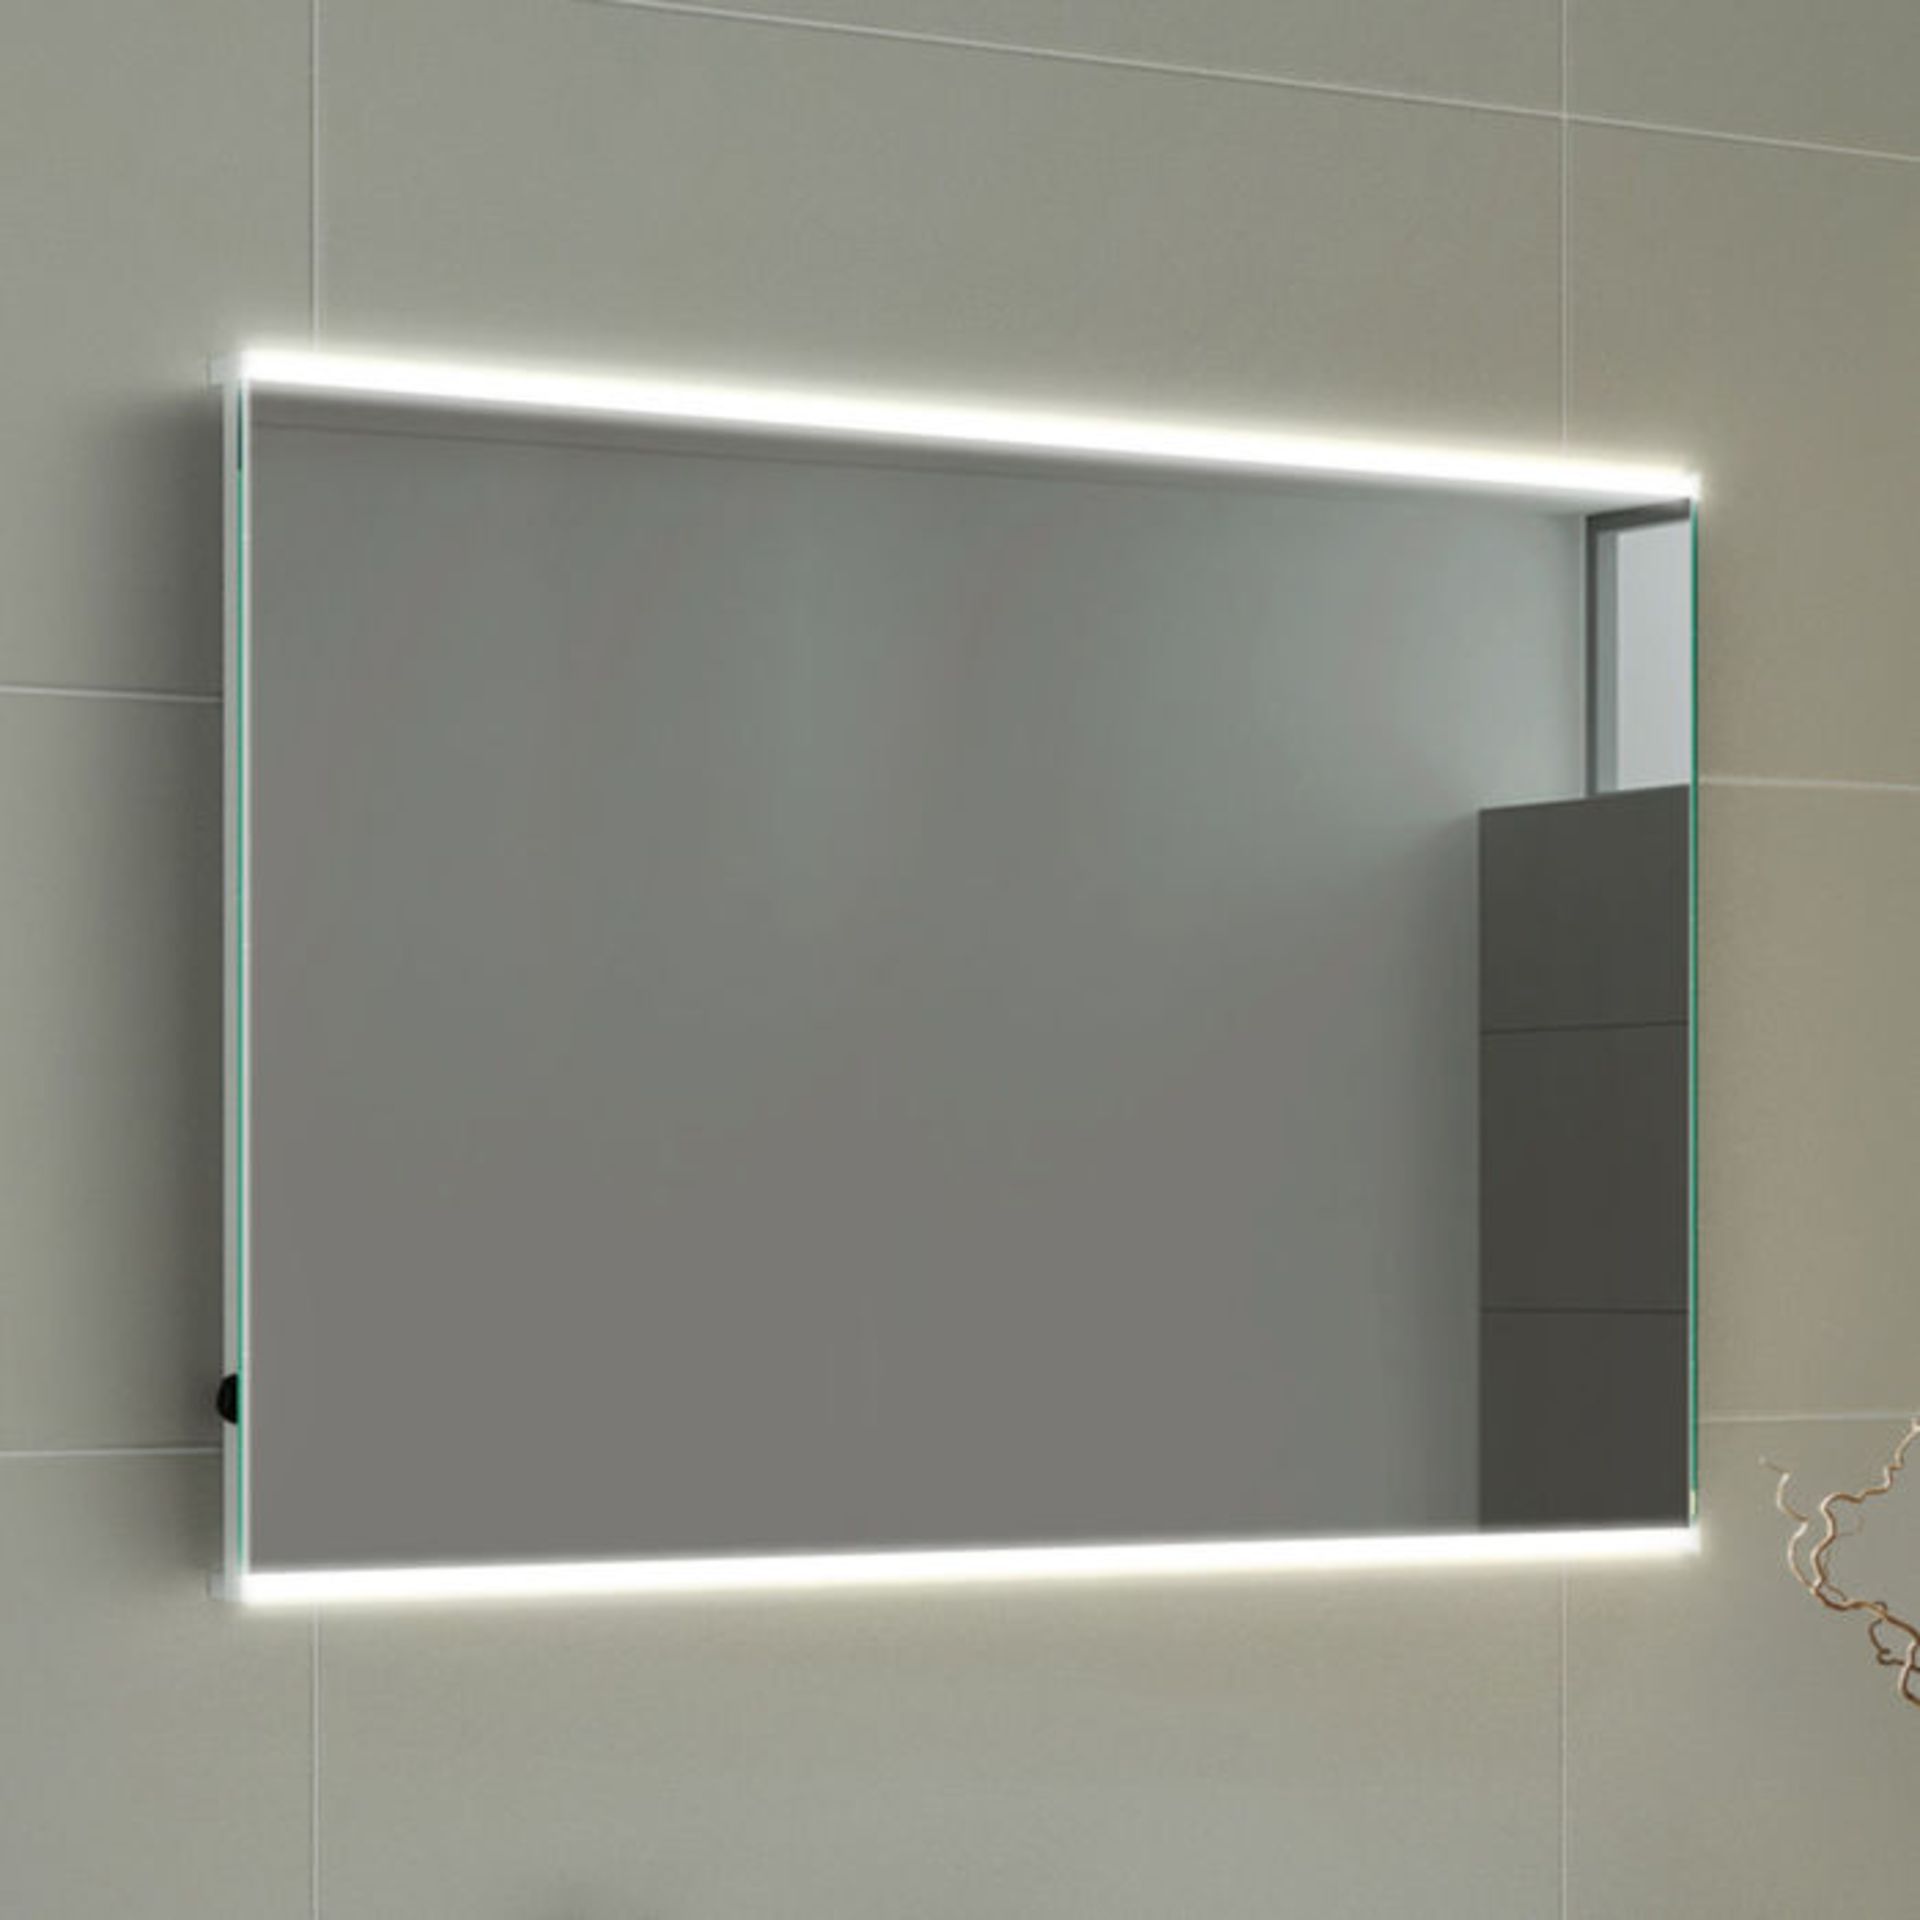 (PT140) 500x700mm Denver Illuminated LED Mirror - Battery Operated. Energy saving controlled On / - Image 2 of 5